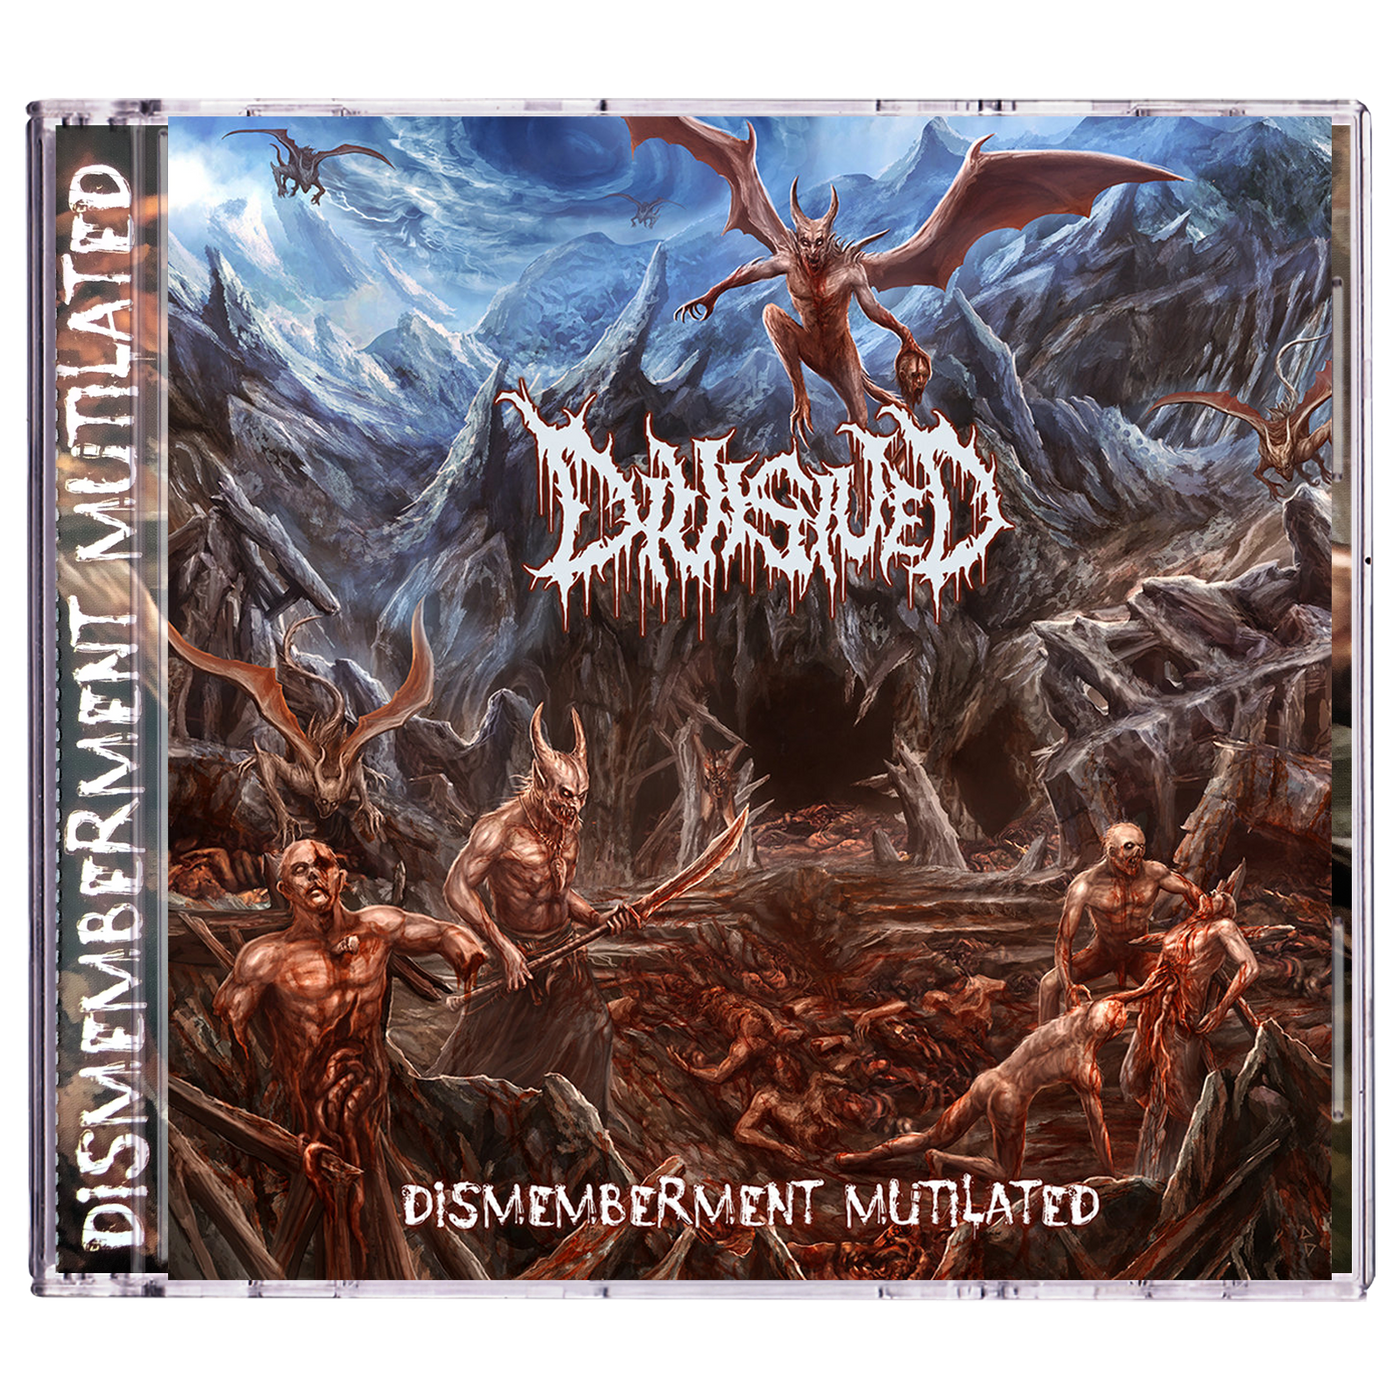 Divisived 'Dismemberment Mutilated' CD